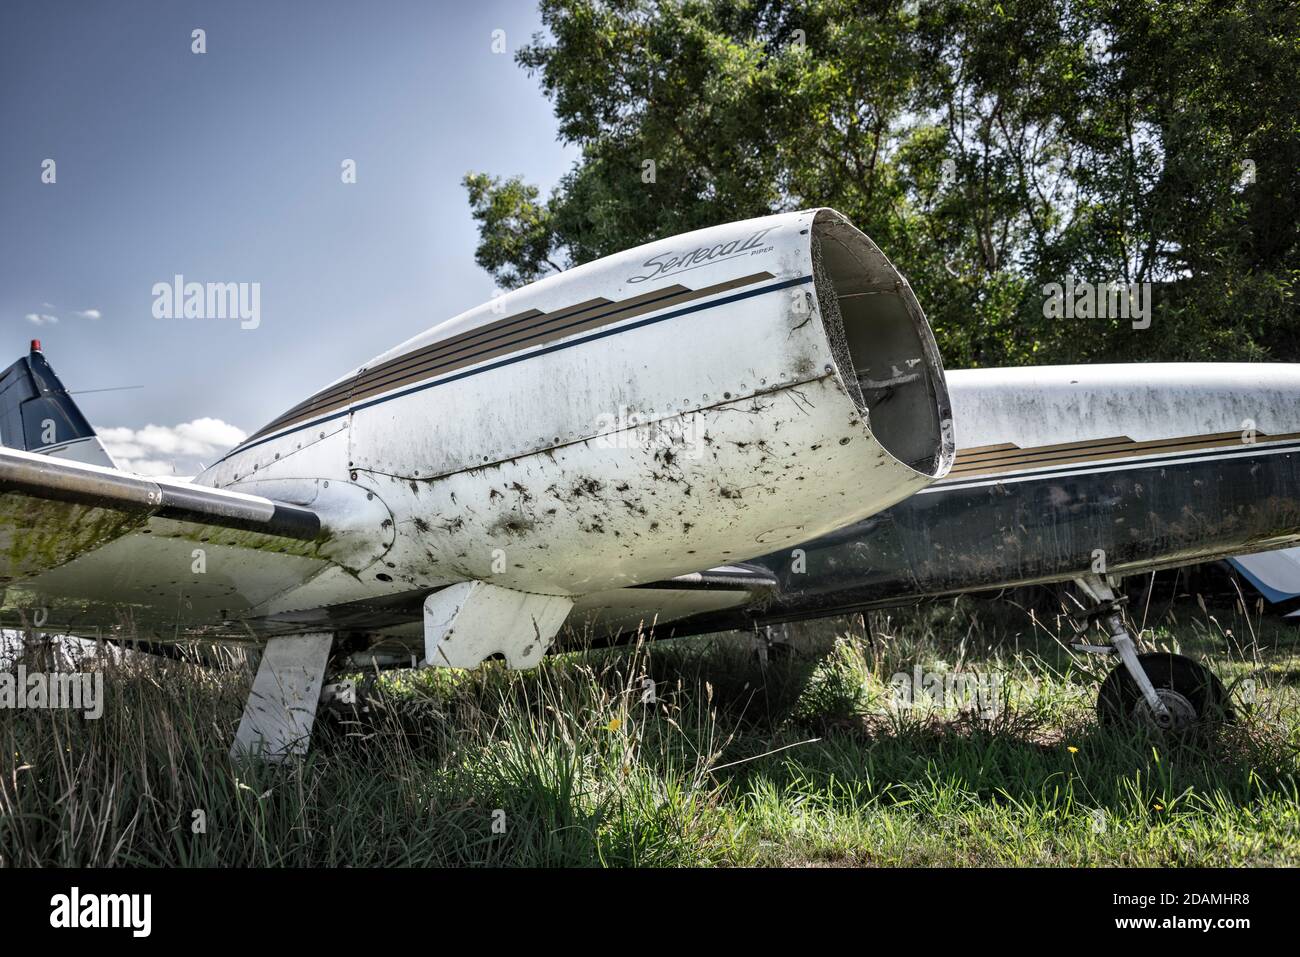 the engine cowling of an old and abandoned twin engine aircraft in a grass field Stock Photo